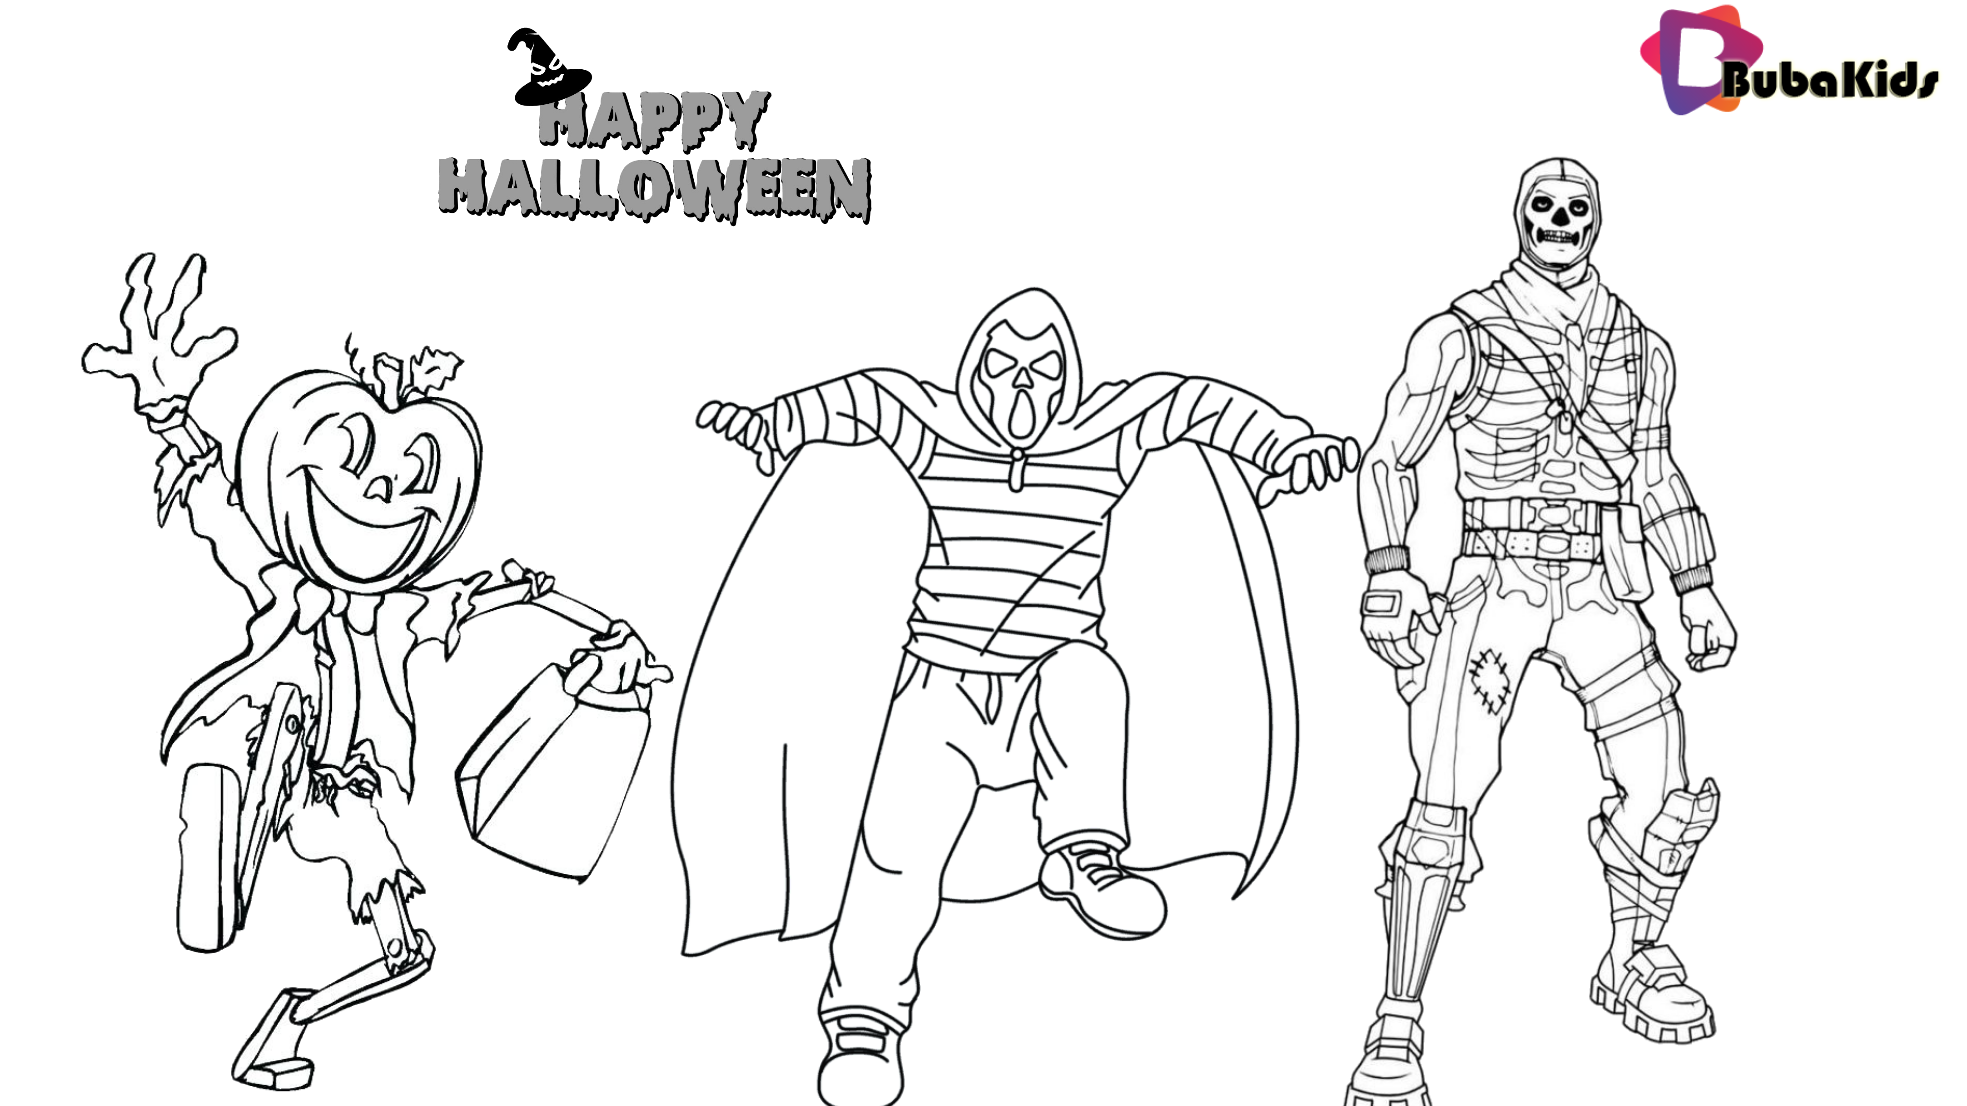 Costume for Halloween party 2019. Printable and coloring page. Wallpaper